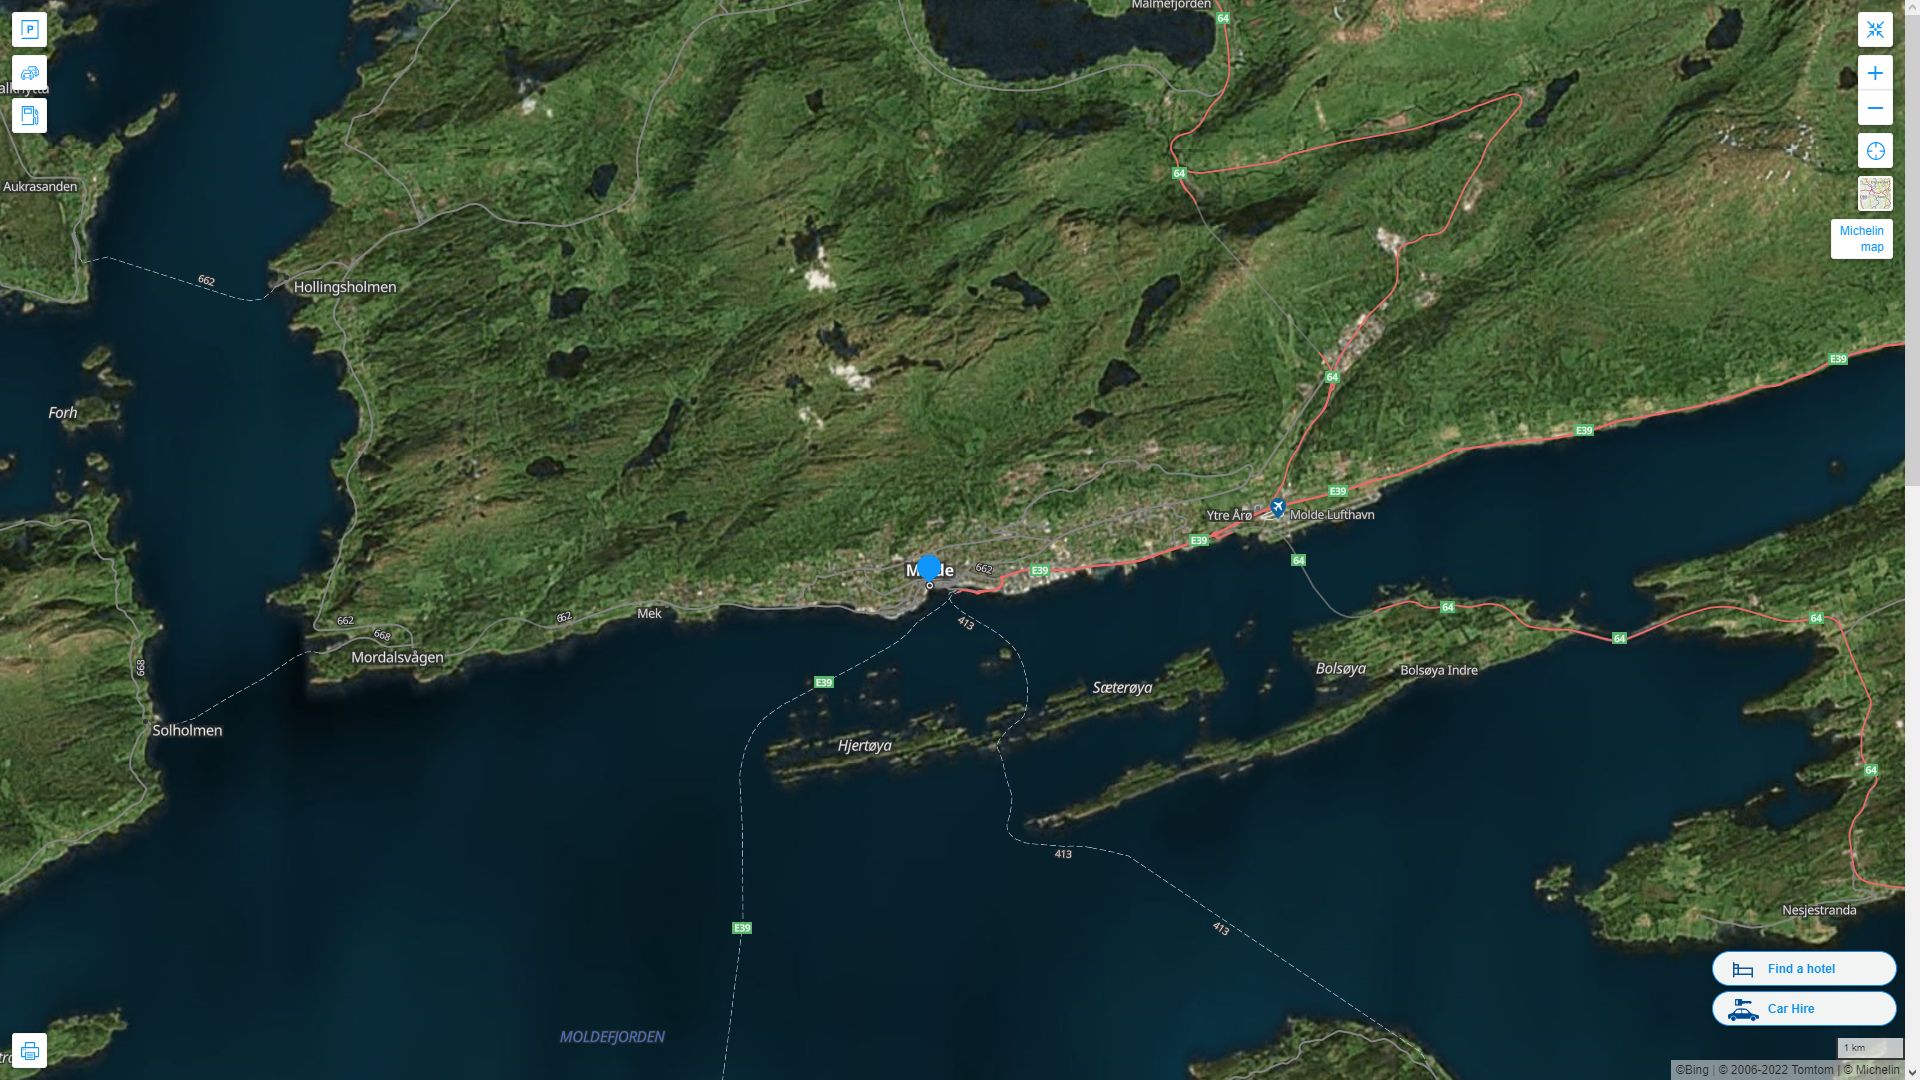 Molde Highway and Road Map with Satellite View